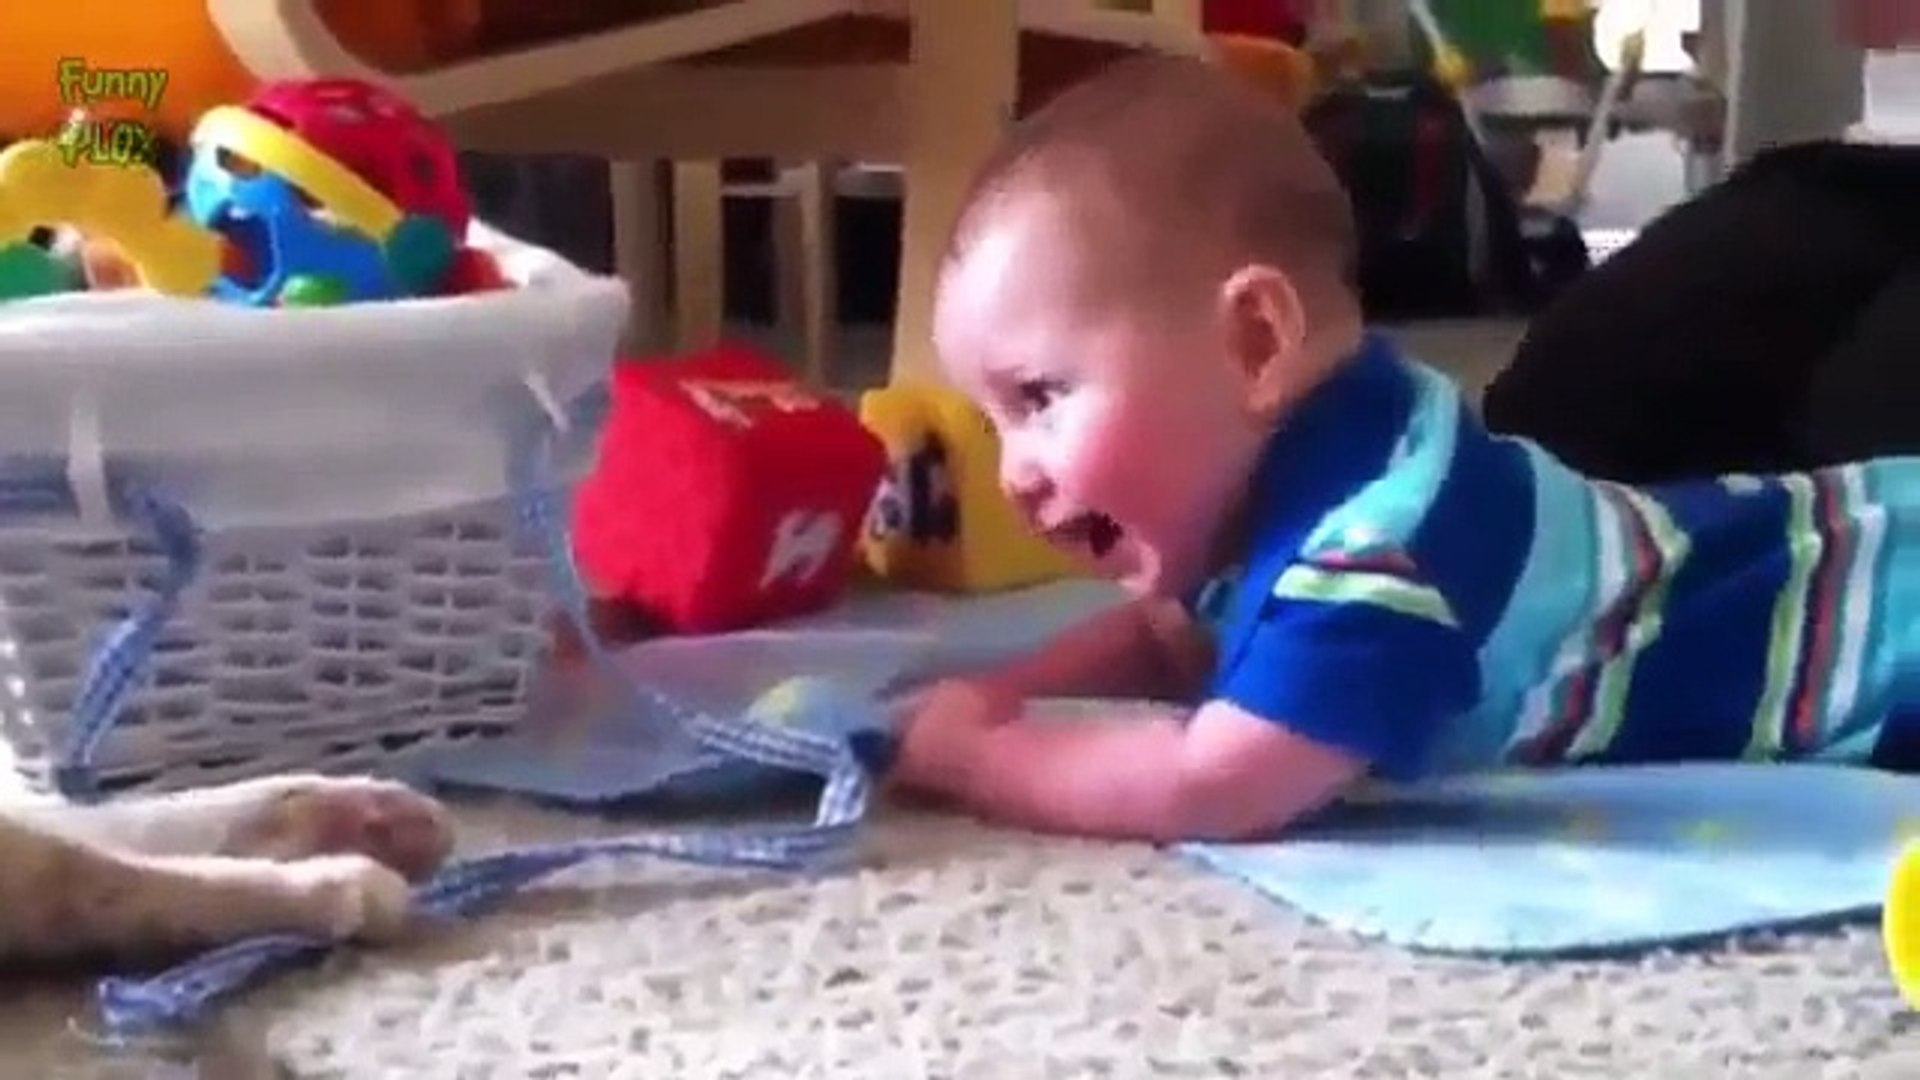 Funny Videos - Funny Baby - Funny Pranks - Funny Babies - Funny Kids 2015